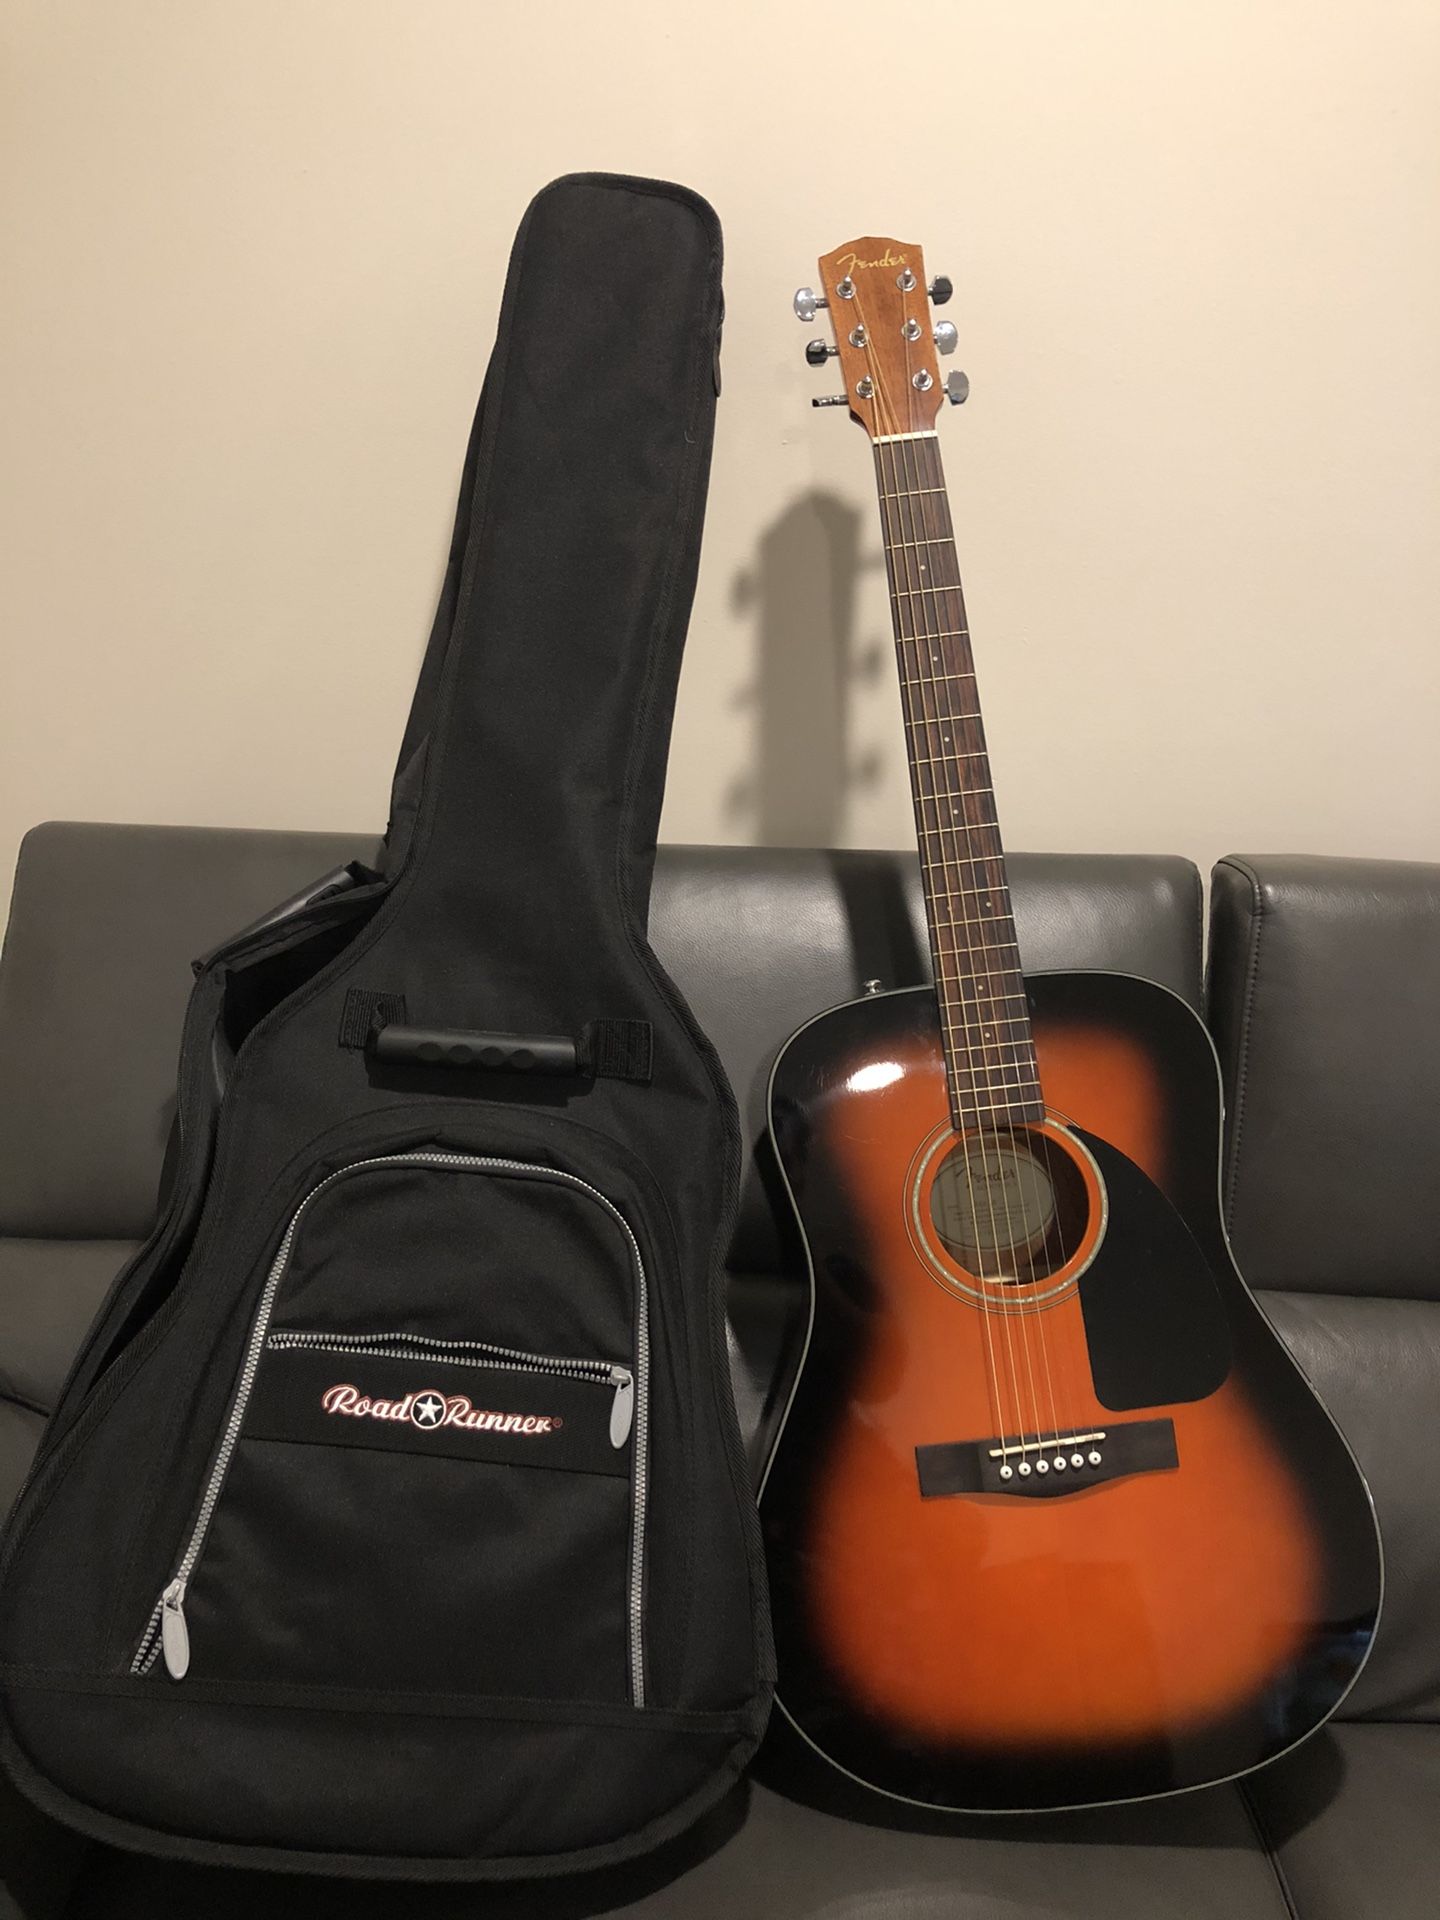 Fender guitar with road runner carrying case